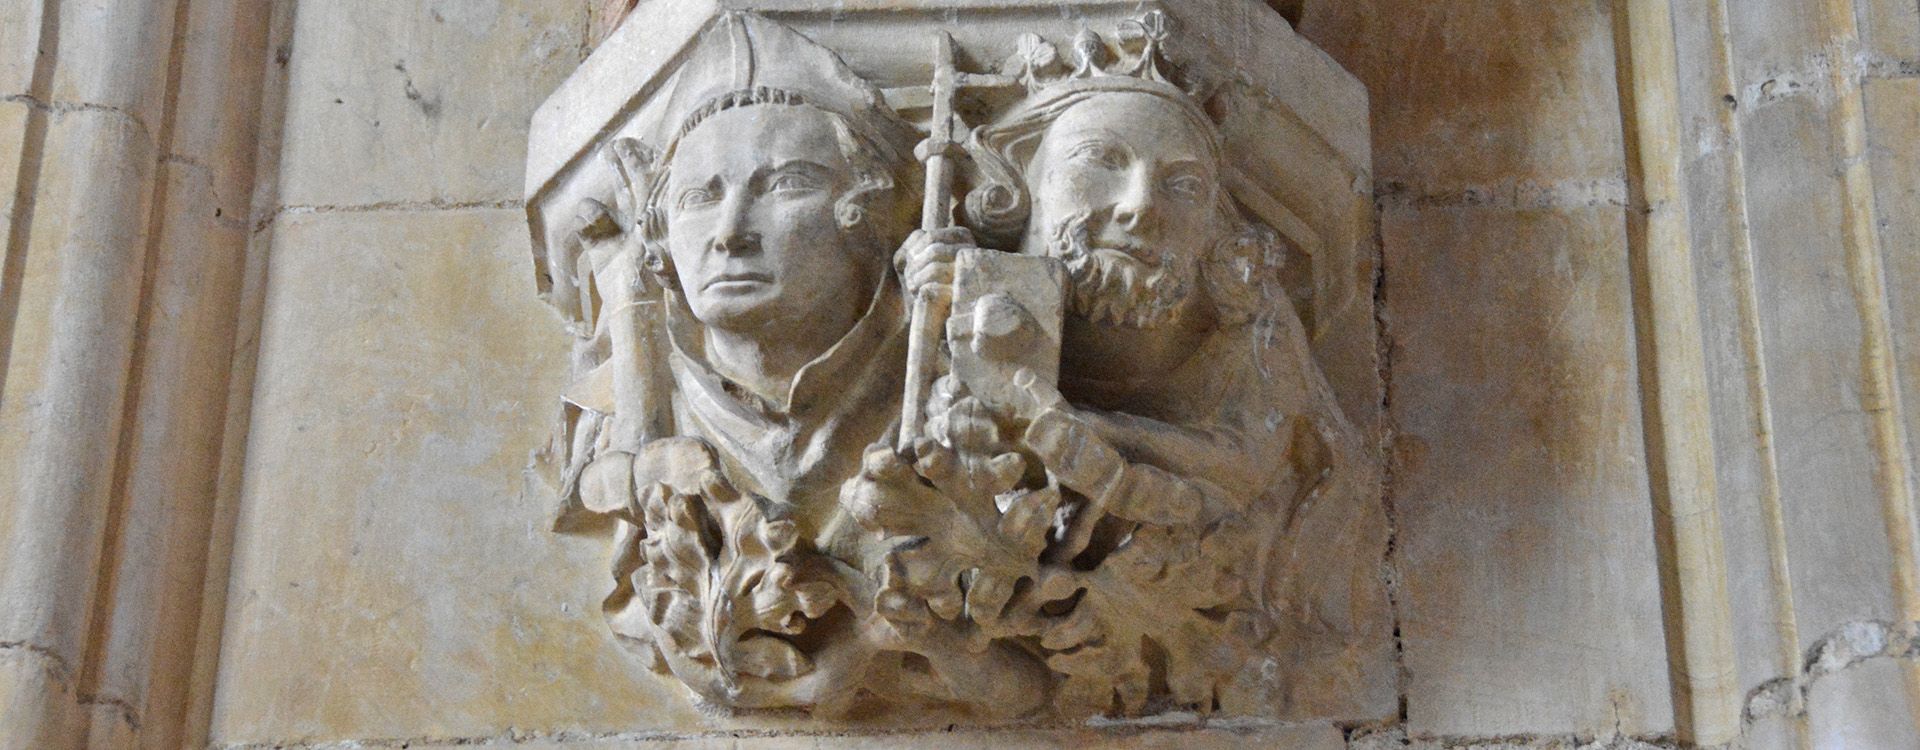 A stone carving of St John of Beverley and the Anglo-Saxon King Athelstan.